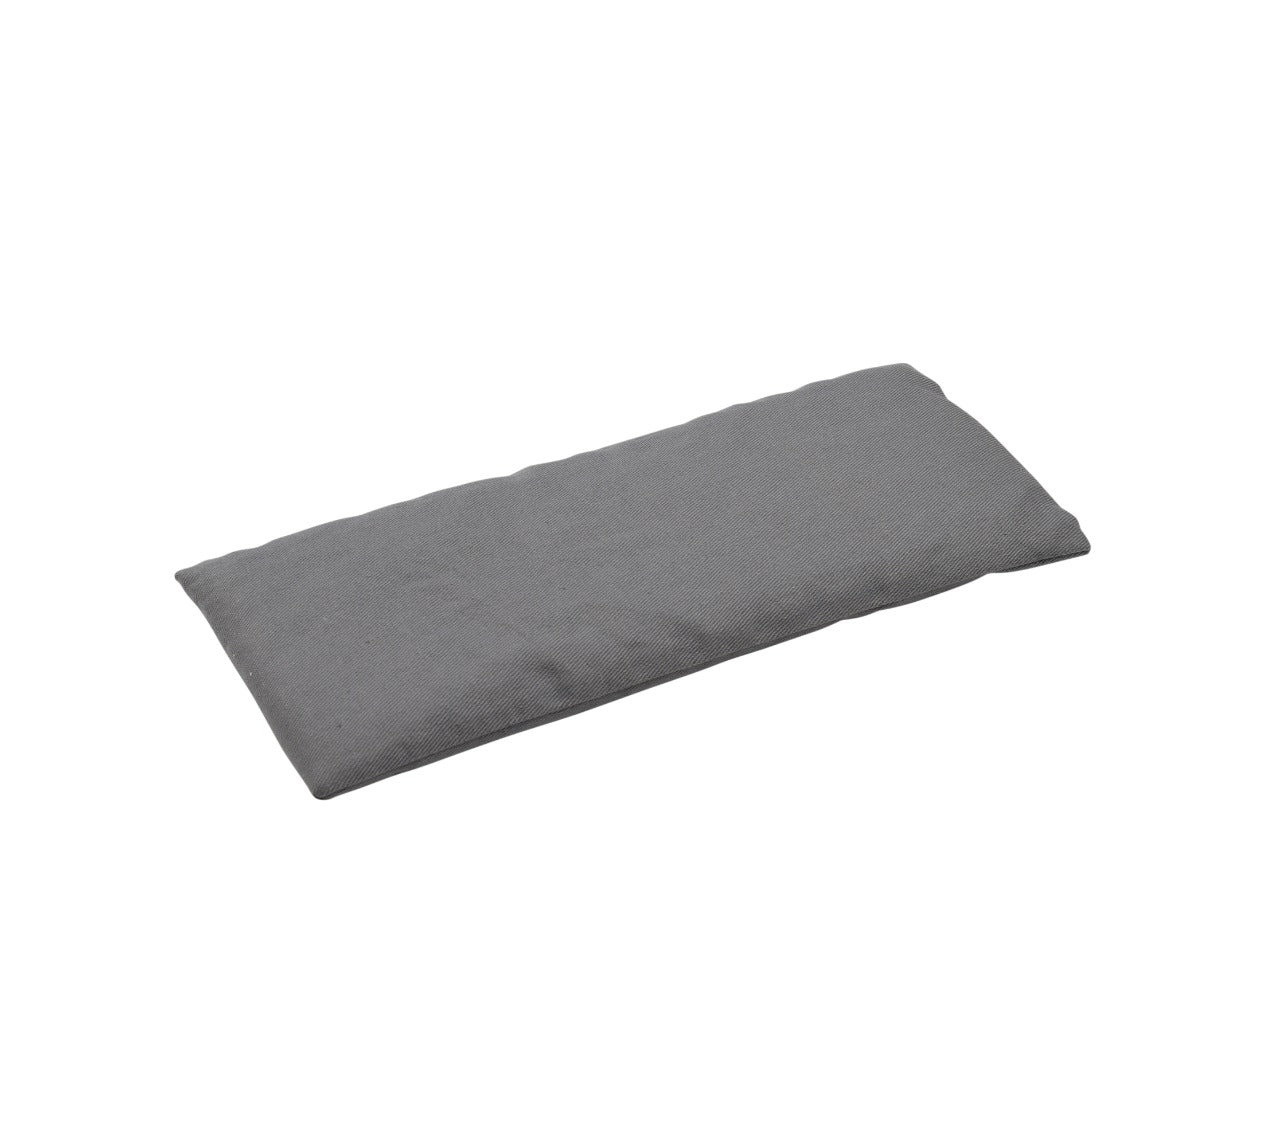 Weighted Eye Pillow